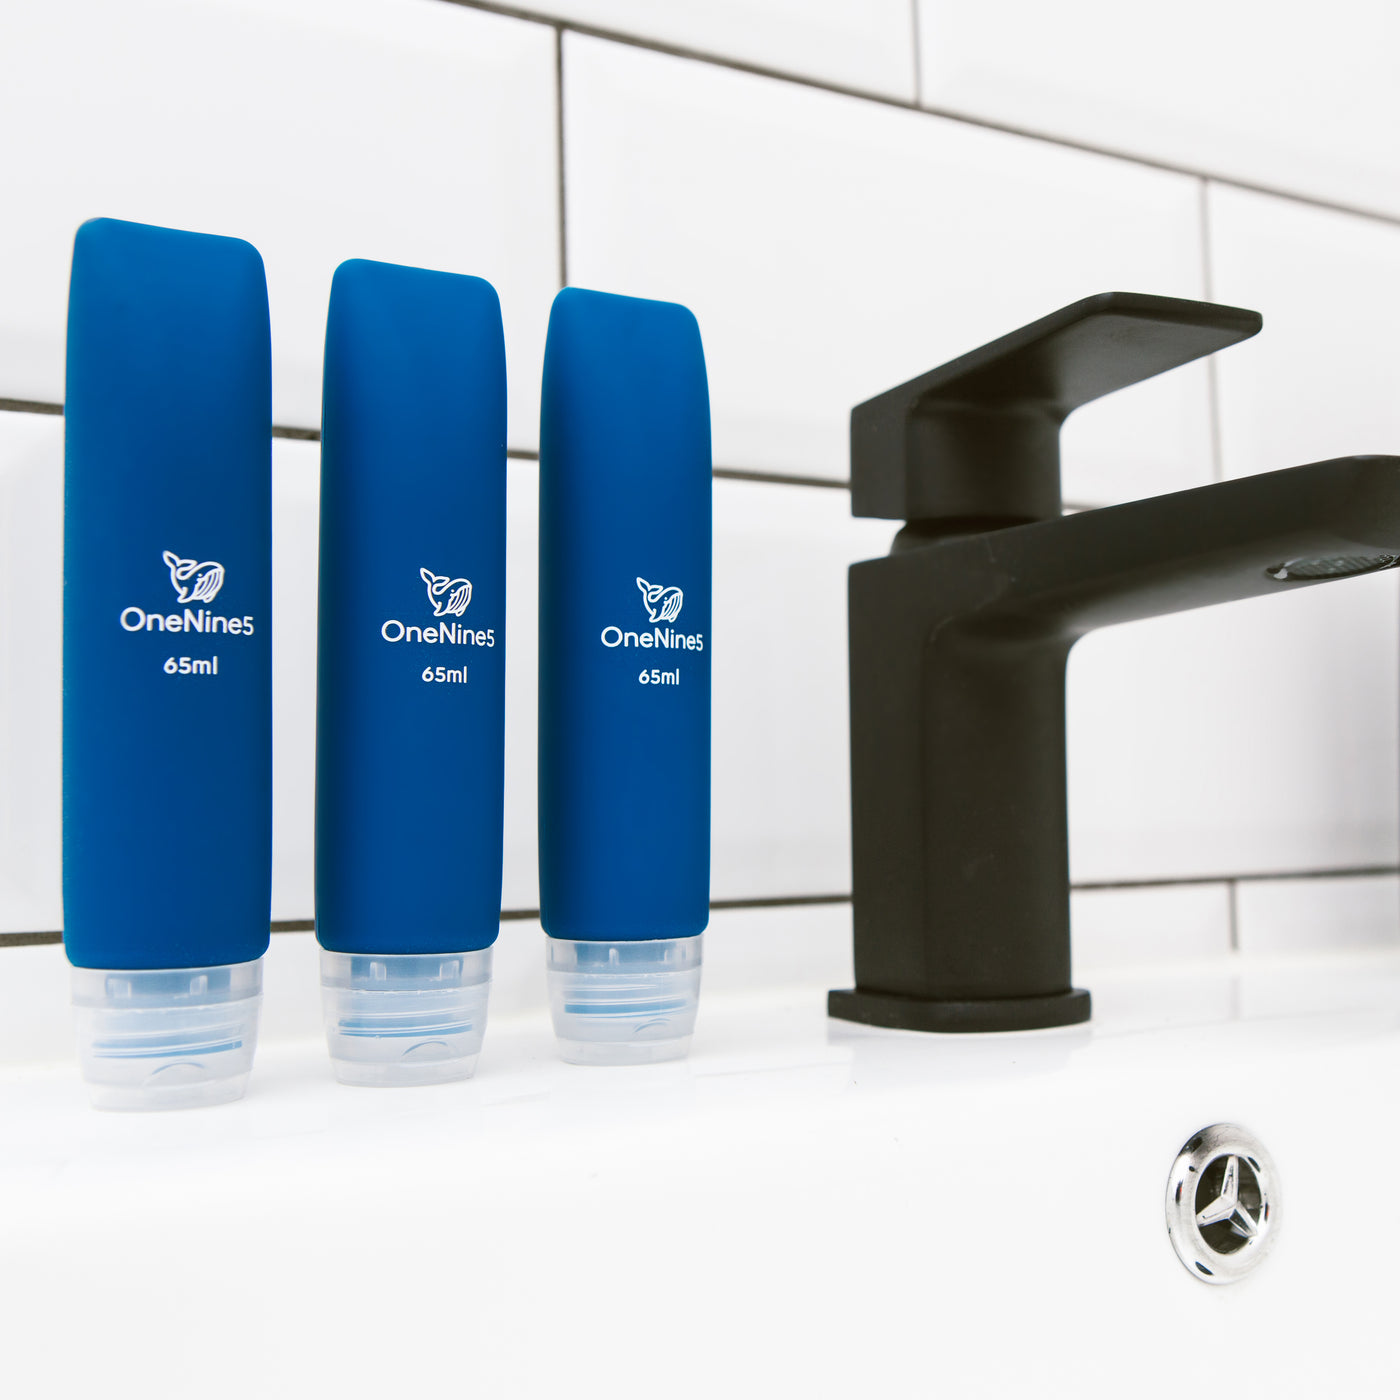 3 pack of OneNine5 blue silicone travel bottles on the bathroom sink, to the right of a black tap